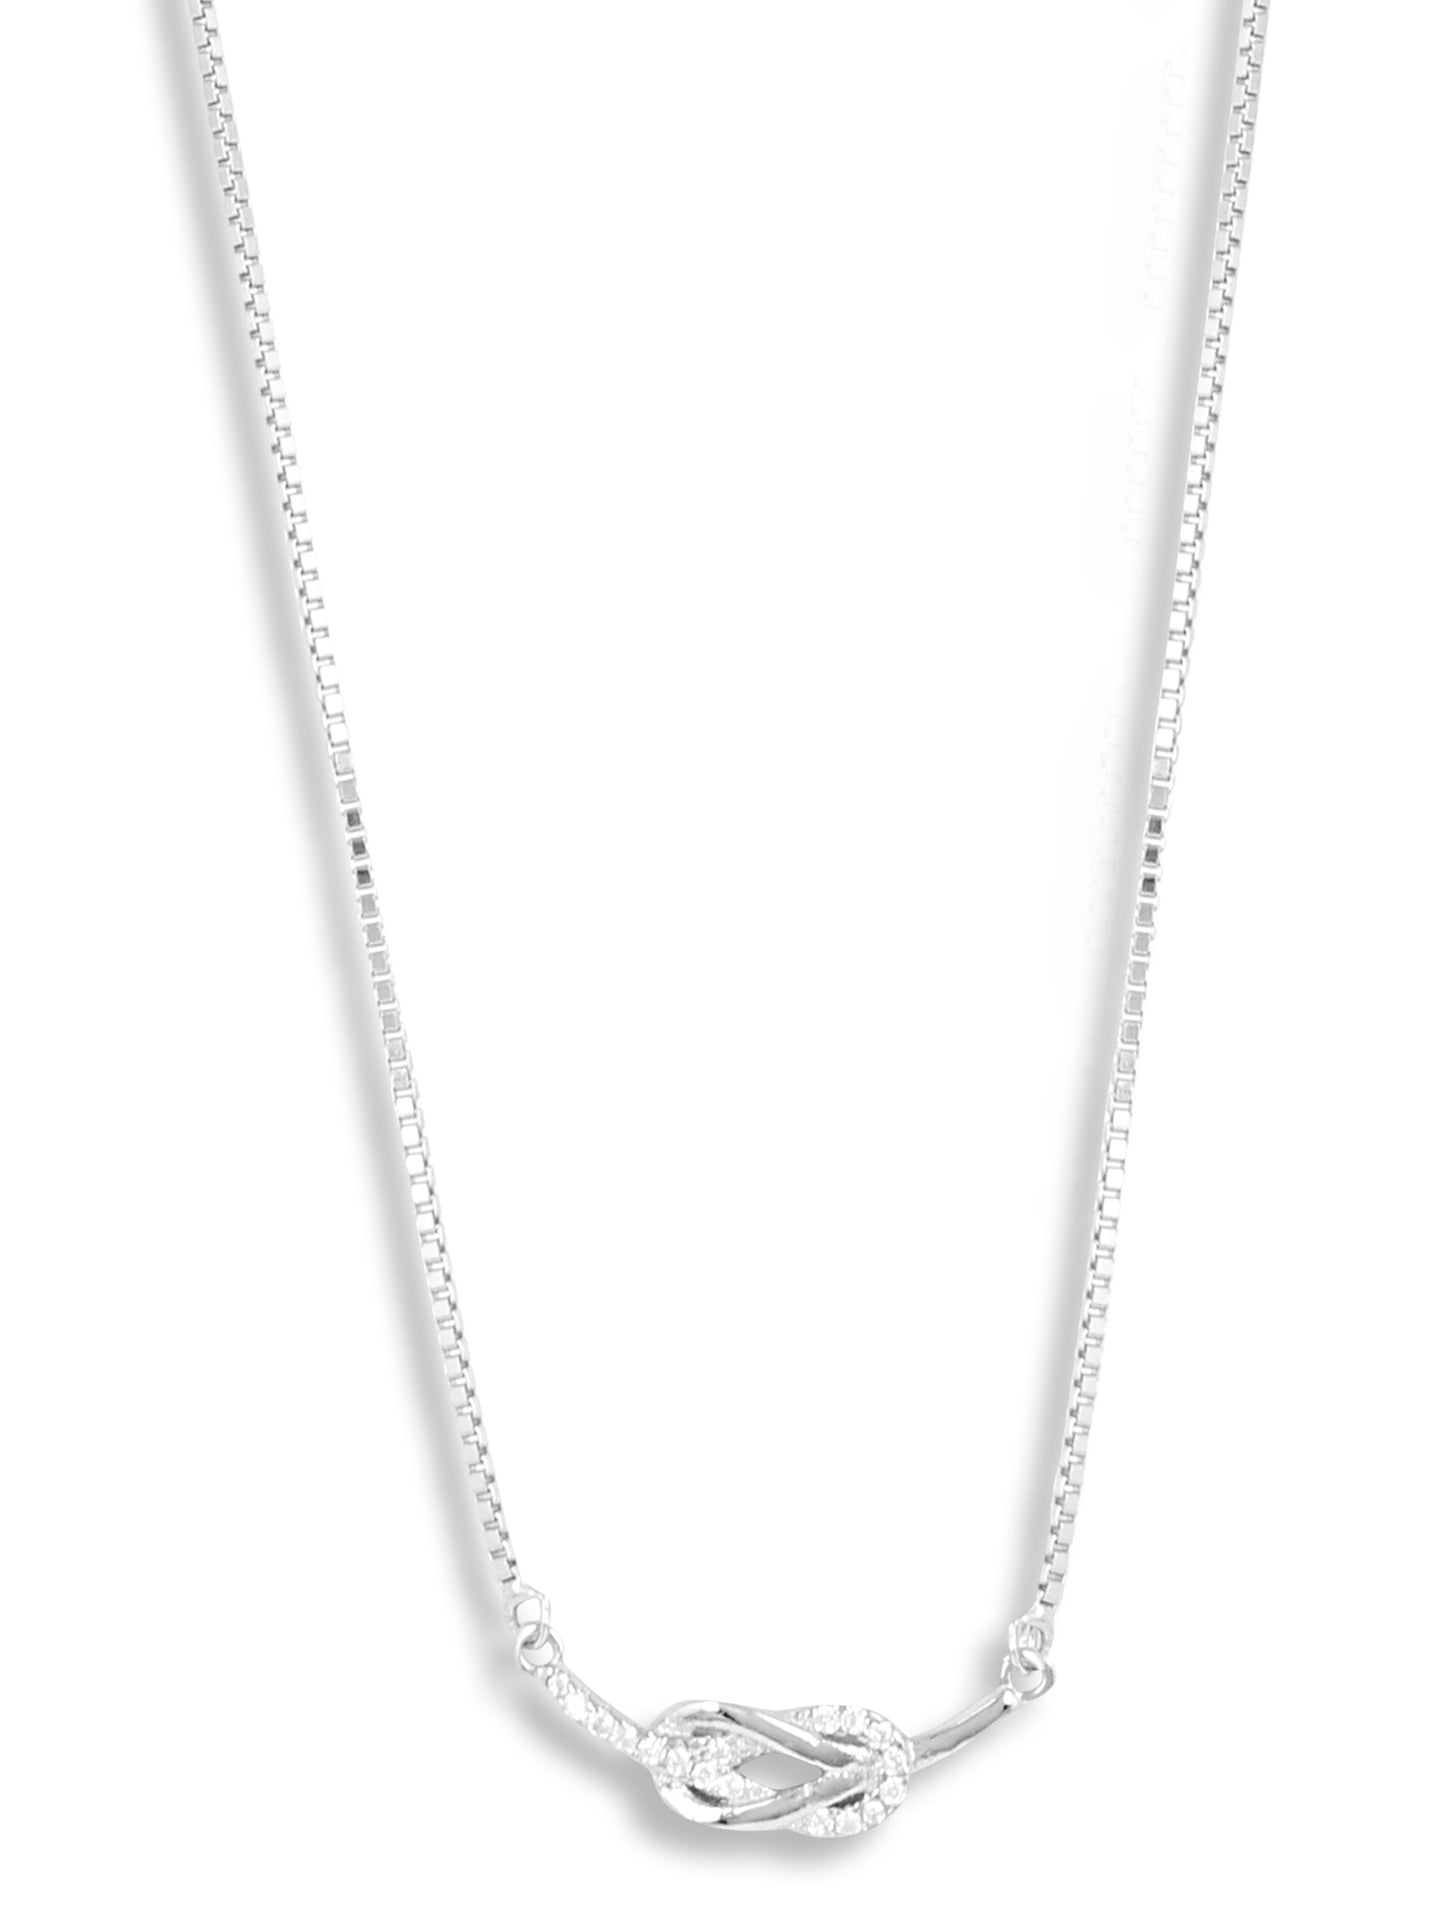 Holding on to you white gold pendant with chain